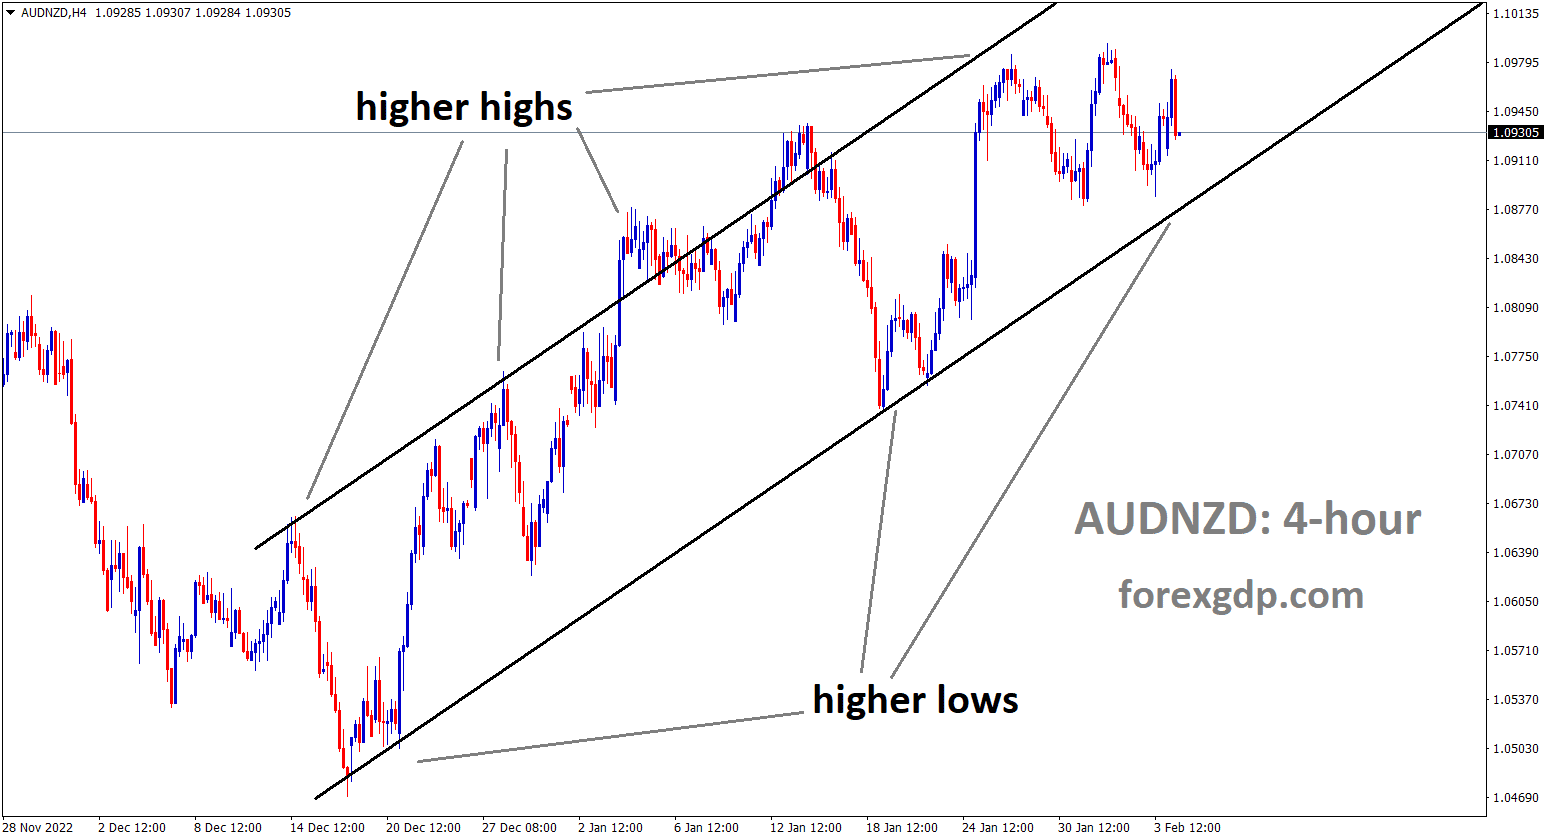 AUDNZD is moving in Ascendign channel and the market has reached the higer low area of the channel.